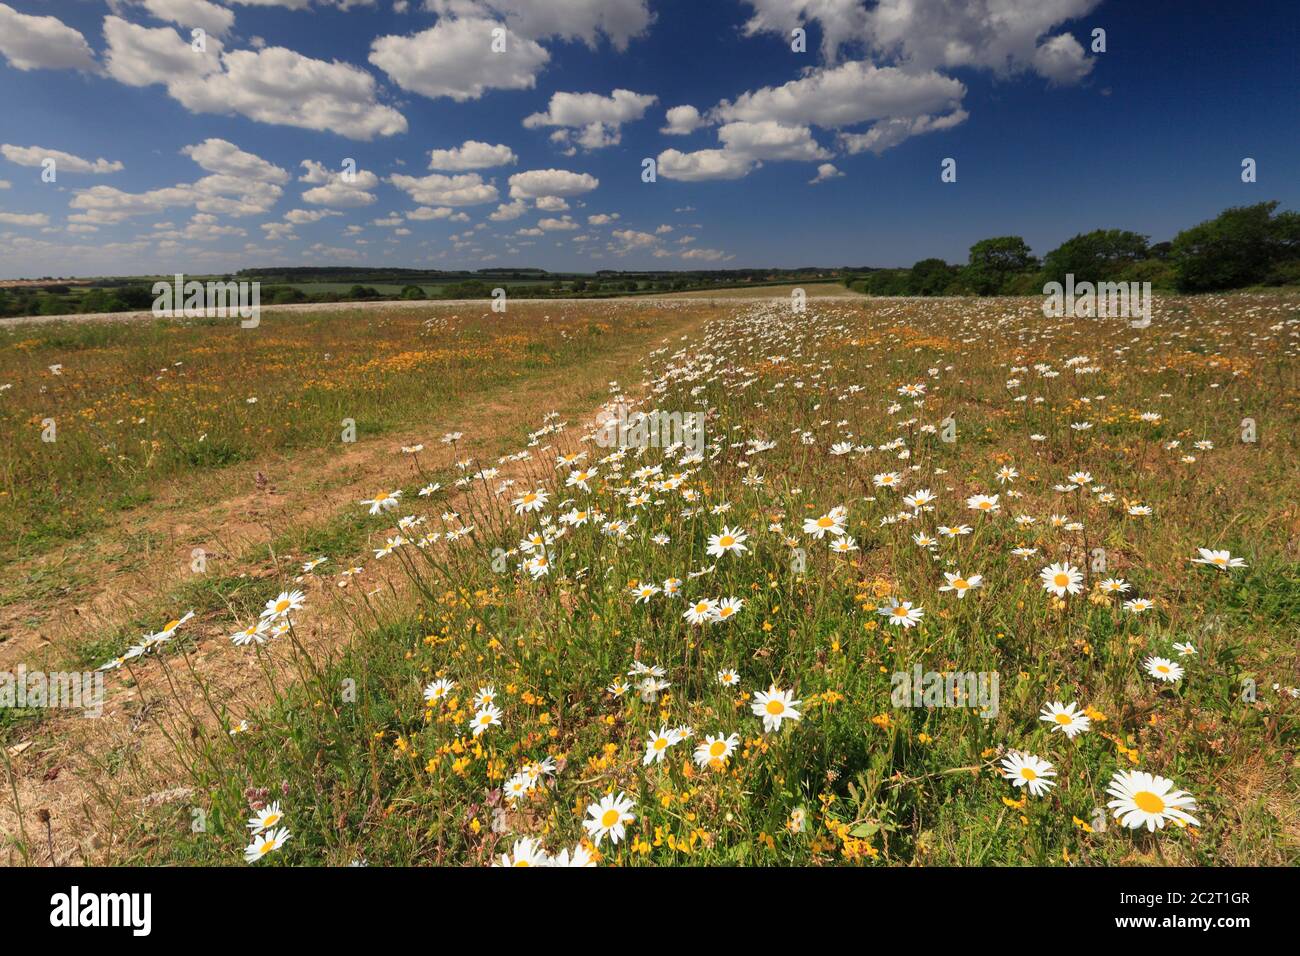 A field with flowering daisies in rural North Norfolk. Stock Photo